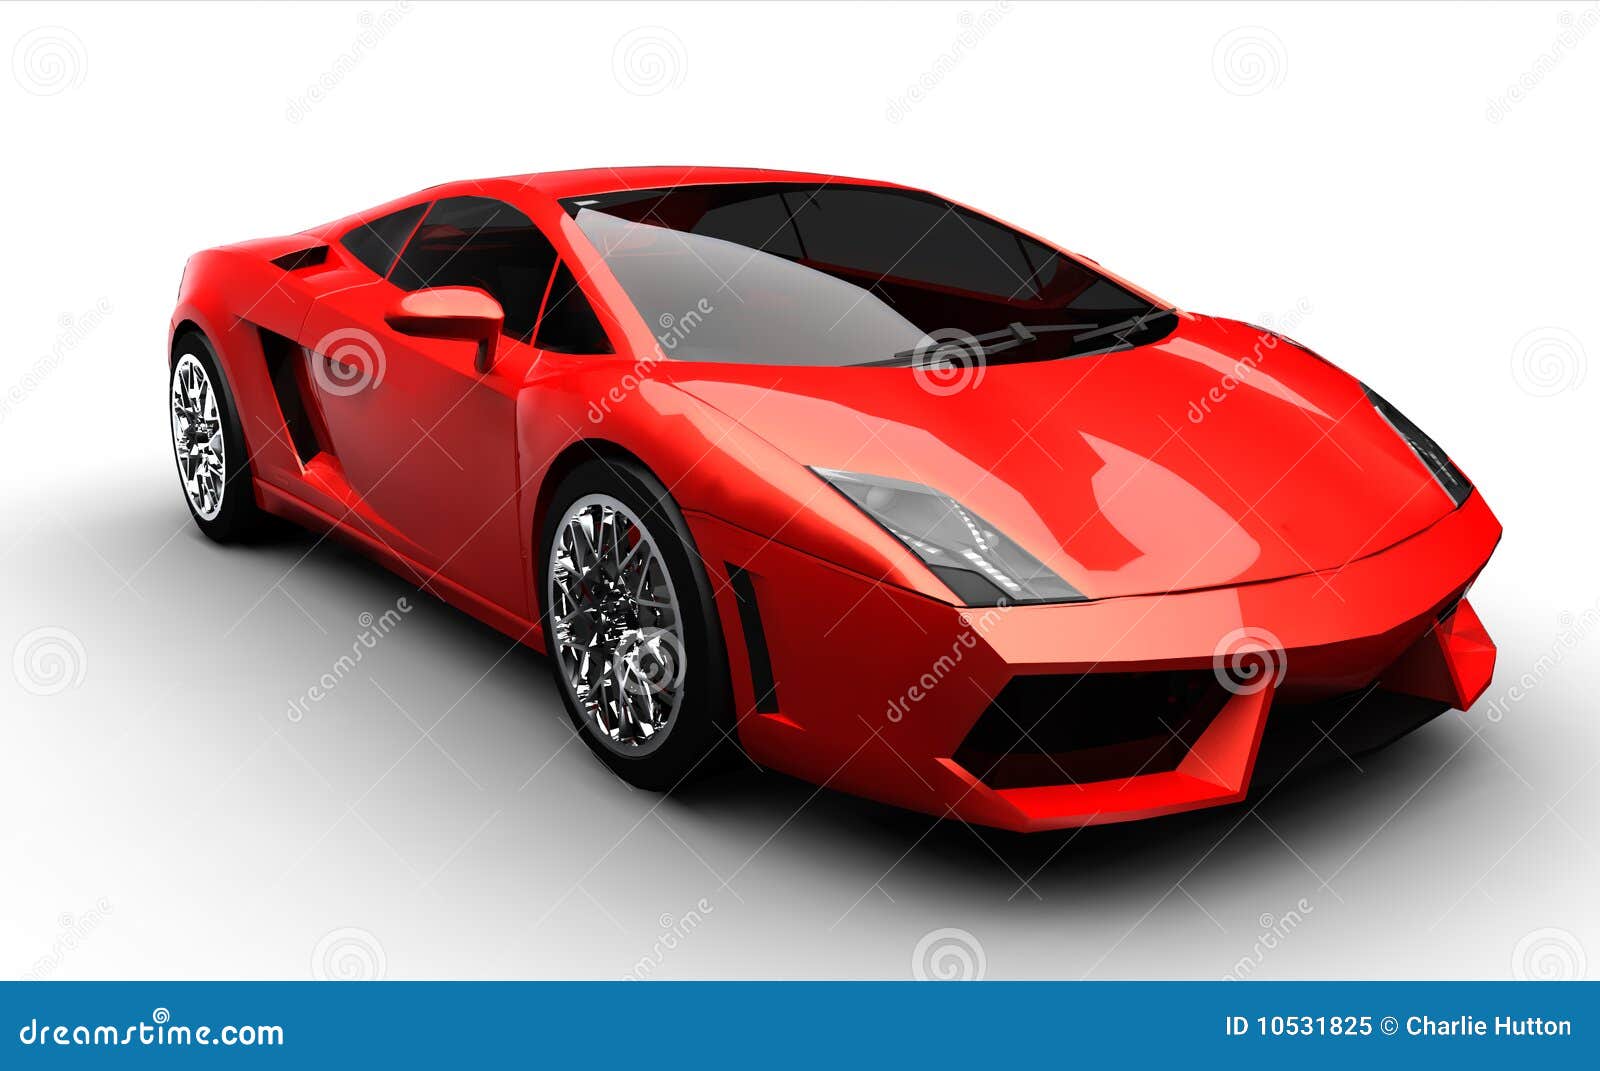 Royalty Free Stock Photo: Red sports car